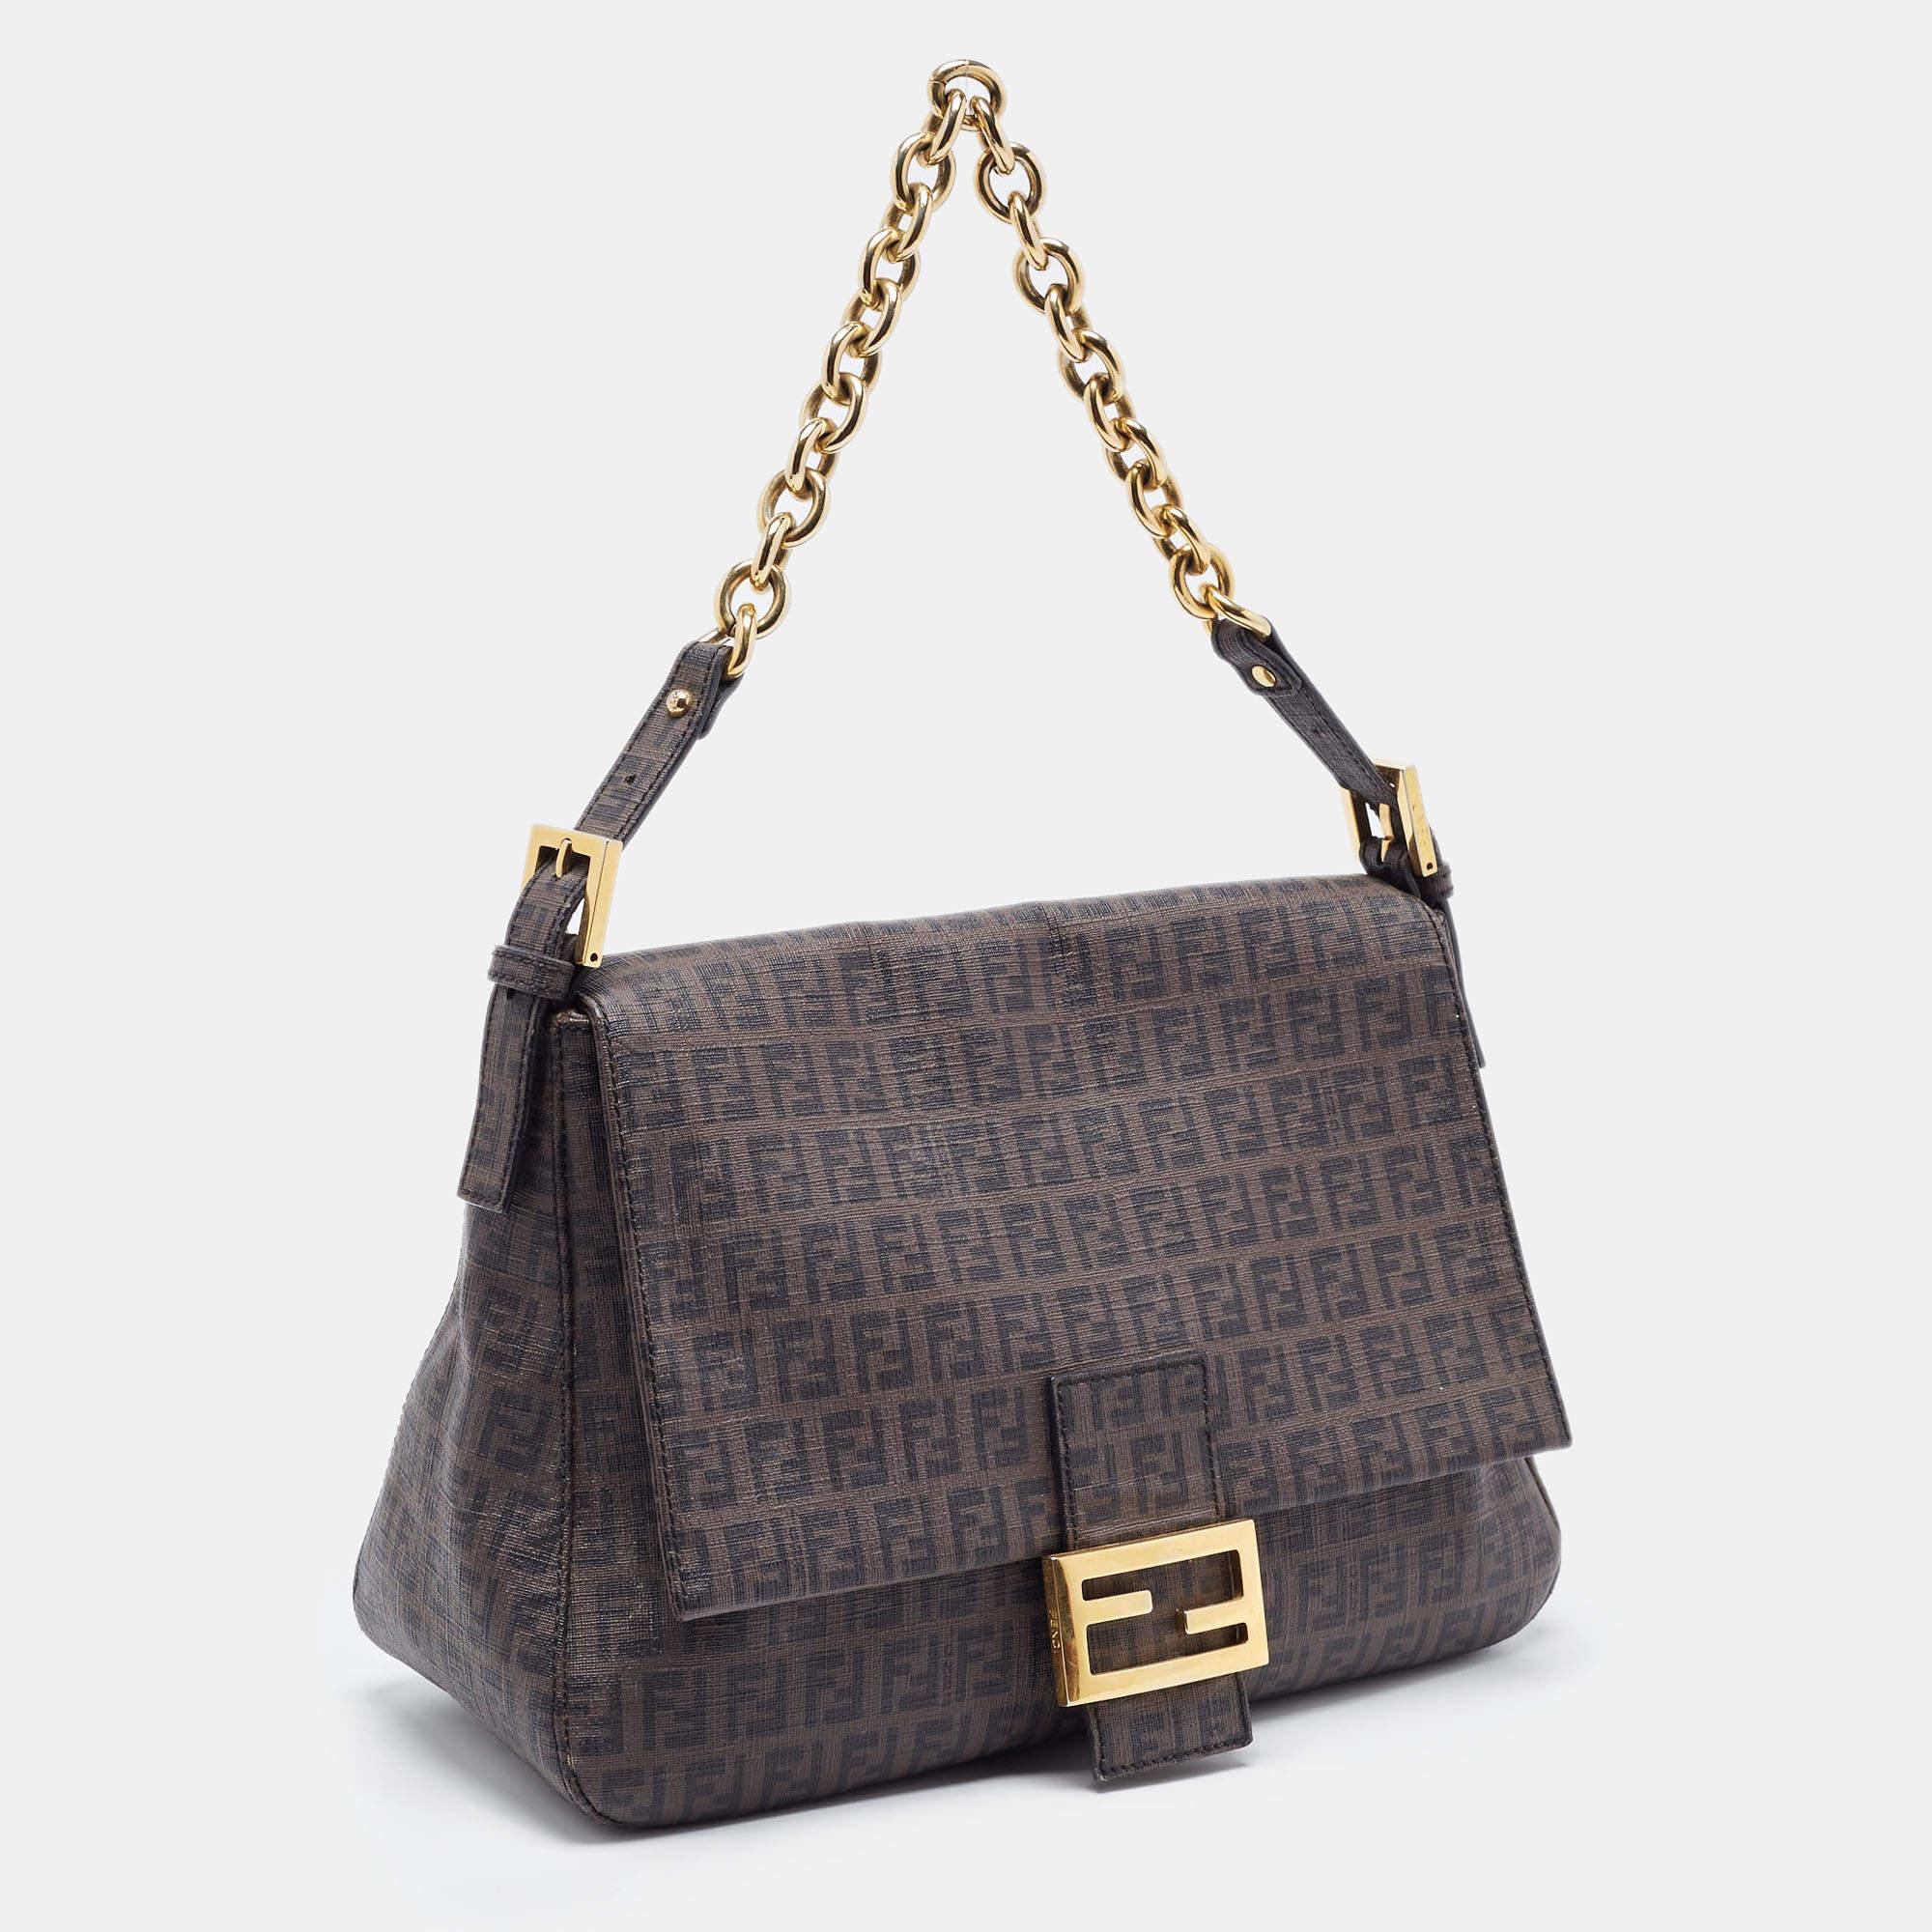 Indulge in timeless luxury with this Fendi bag for women. Meticulously crafted, this exquisite accessory embodies elegance, functionality, and style, making it the ultimate companion for every sophisticated woman.

